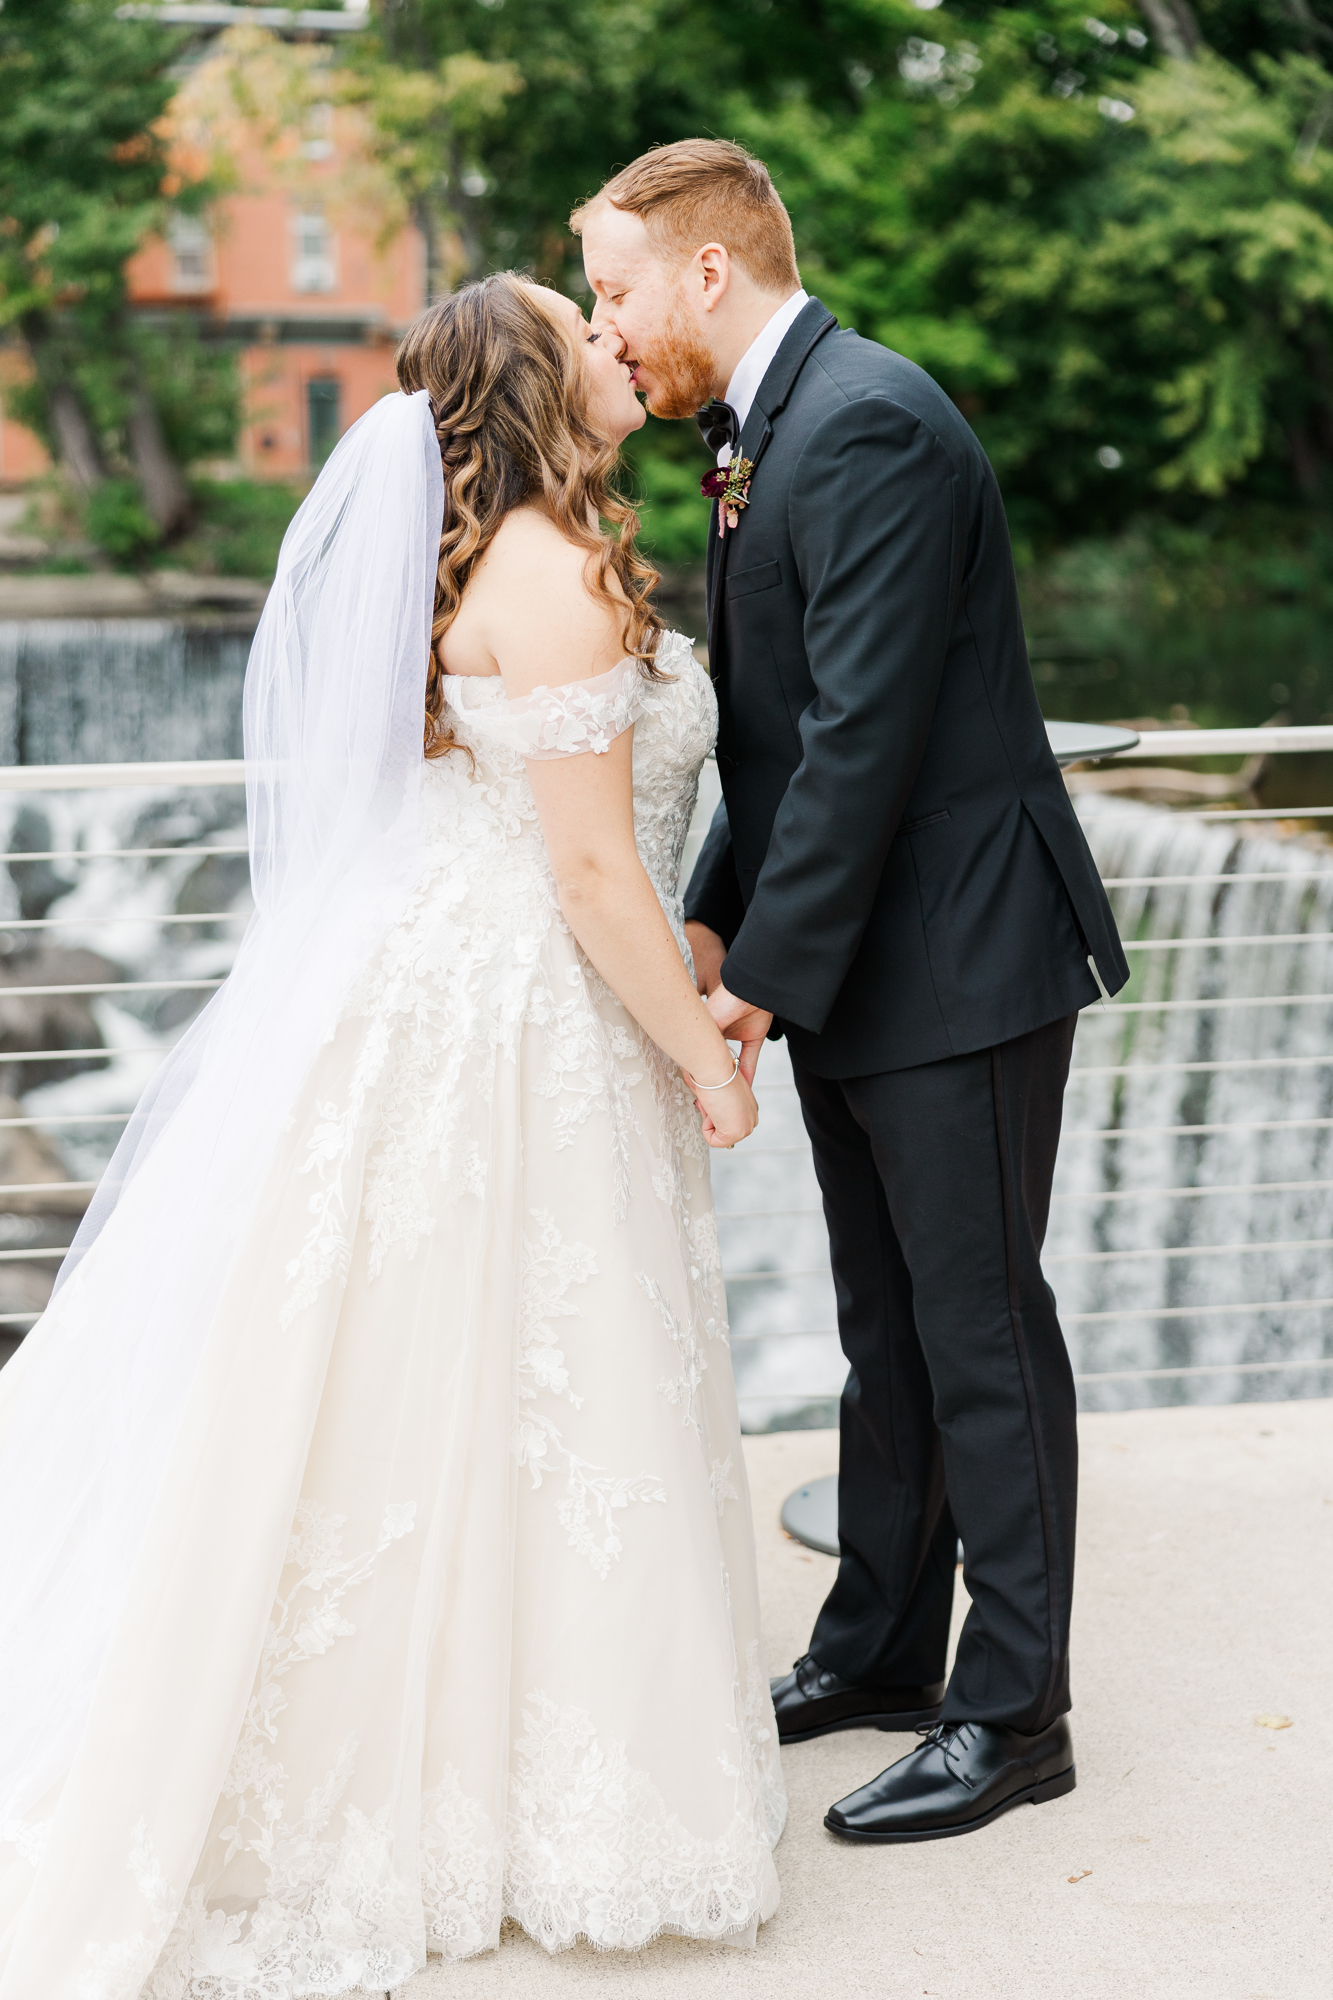 Intimate Beacon Wedding at The Roundhouse, NY